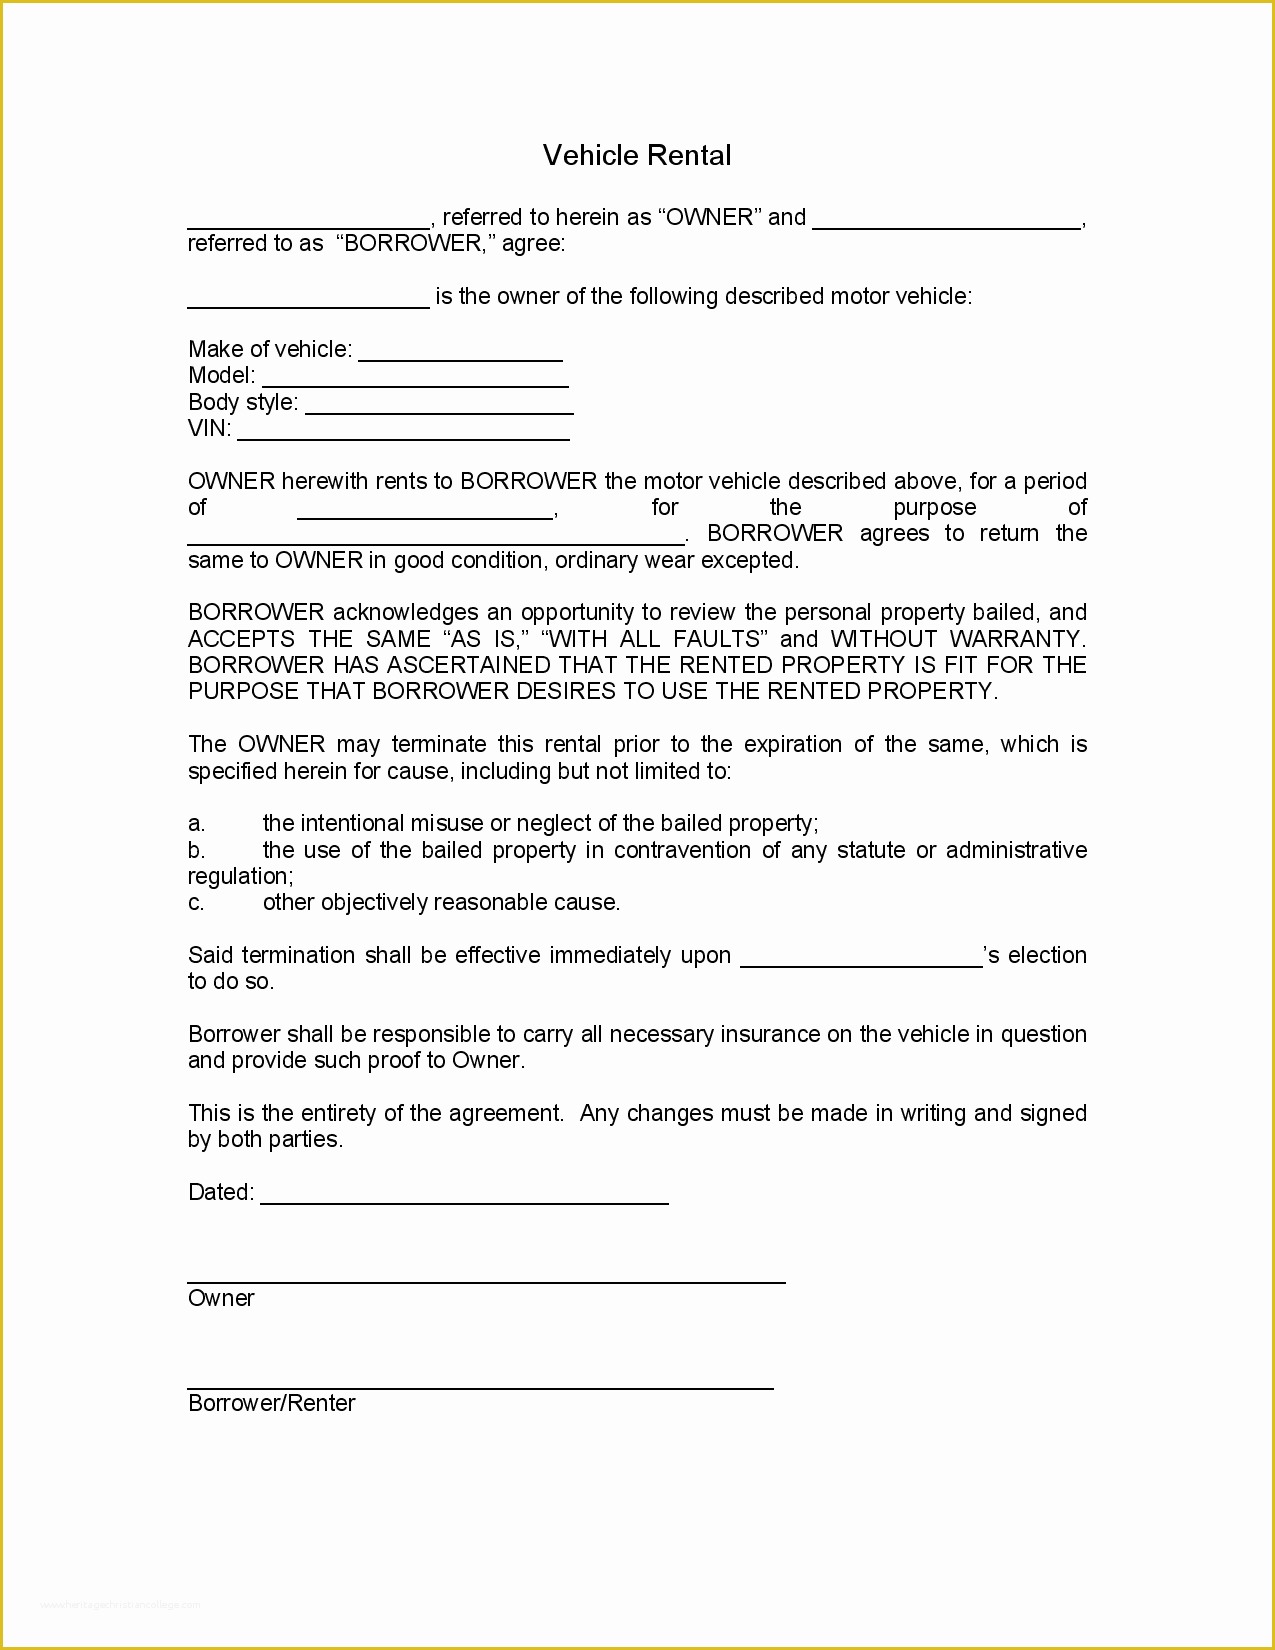 Free Online Loan Agreement Template Of Certificate solicitation